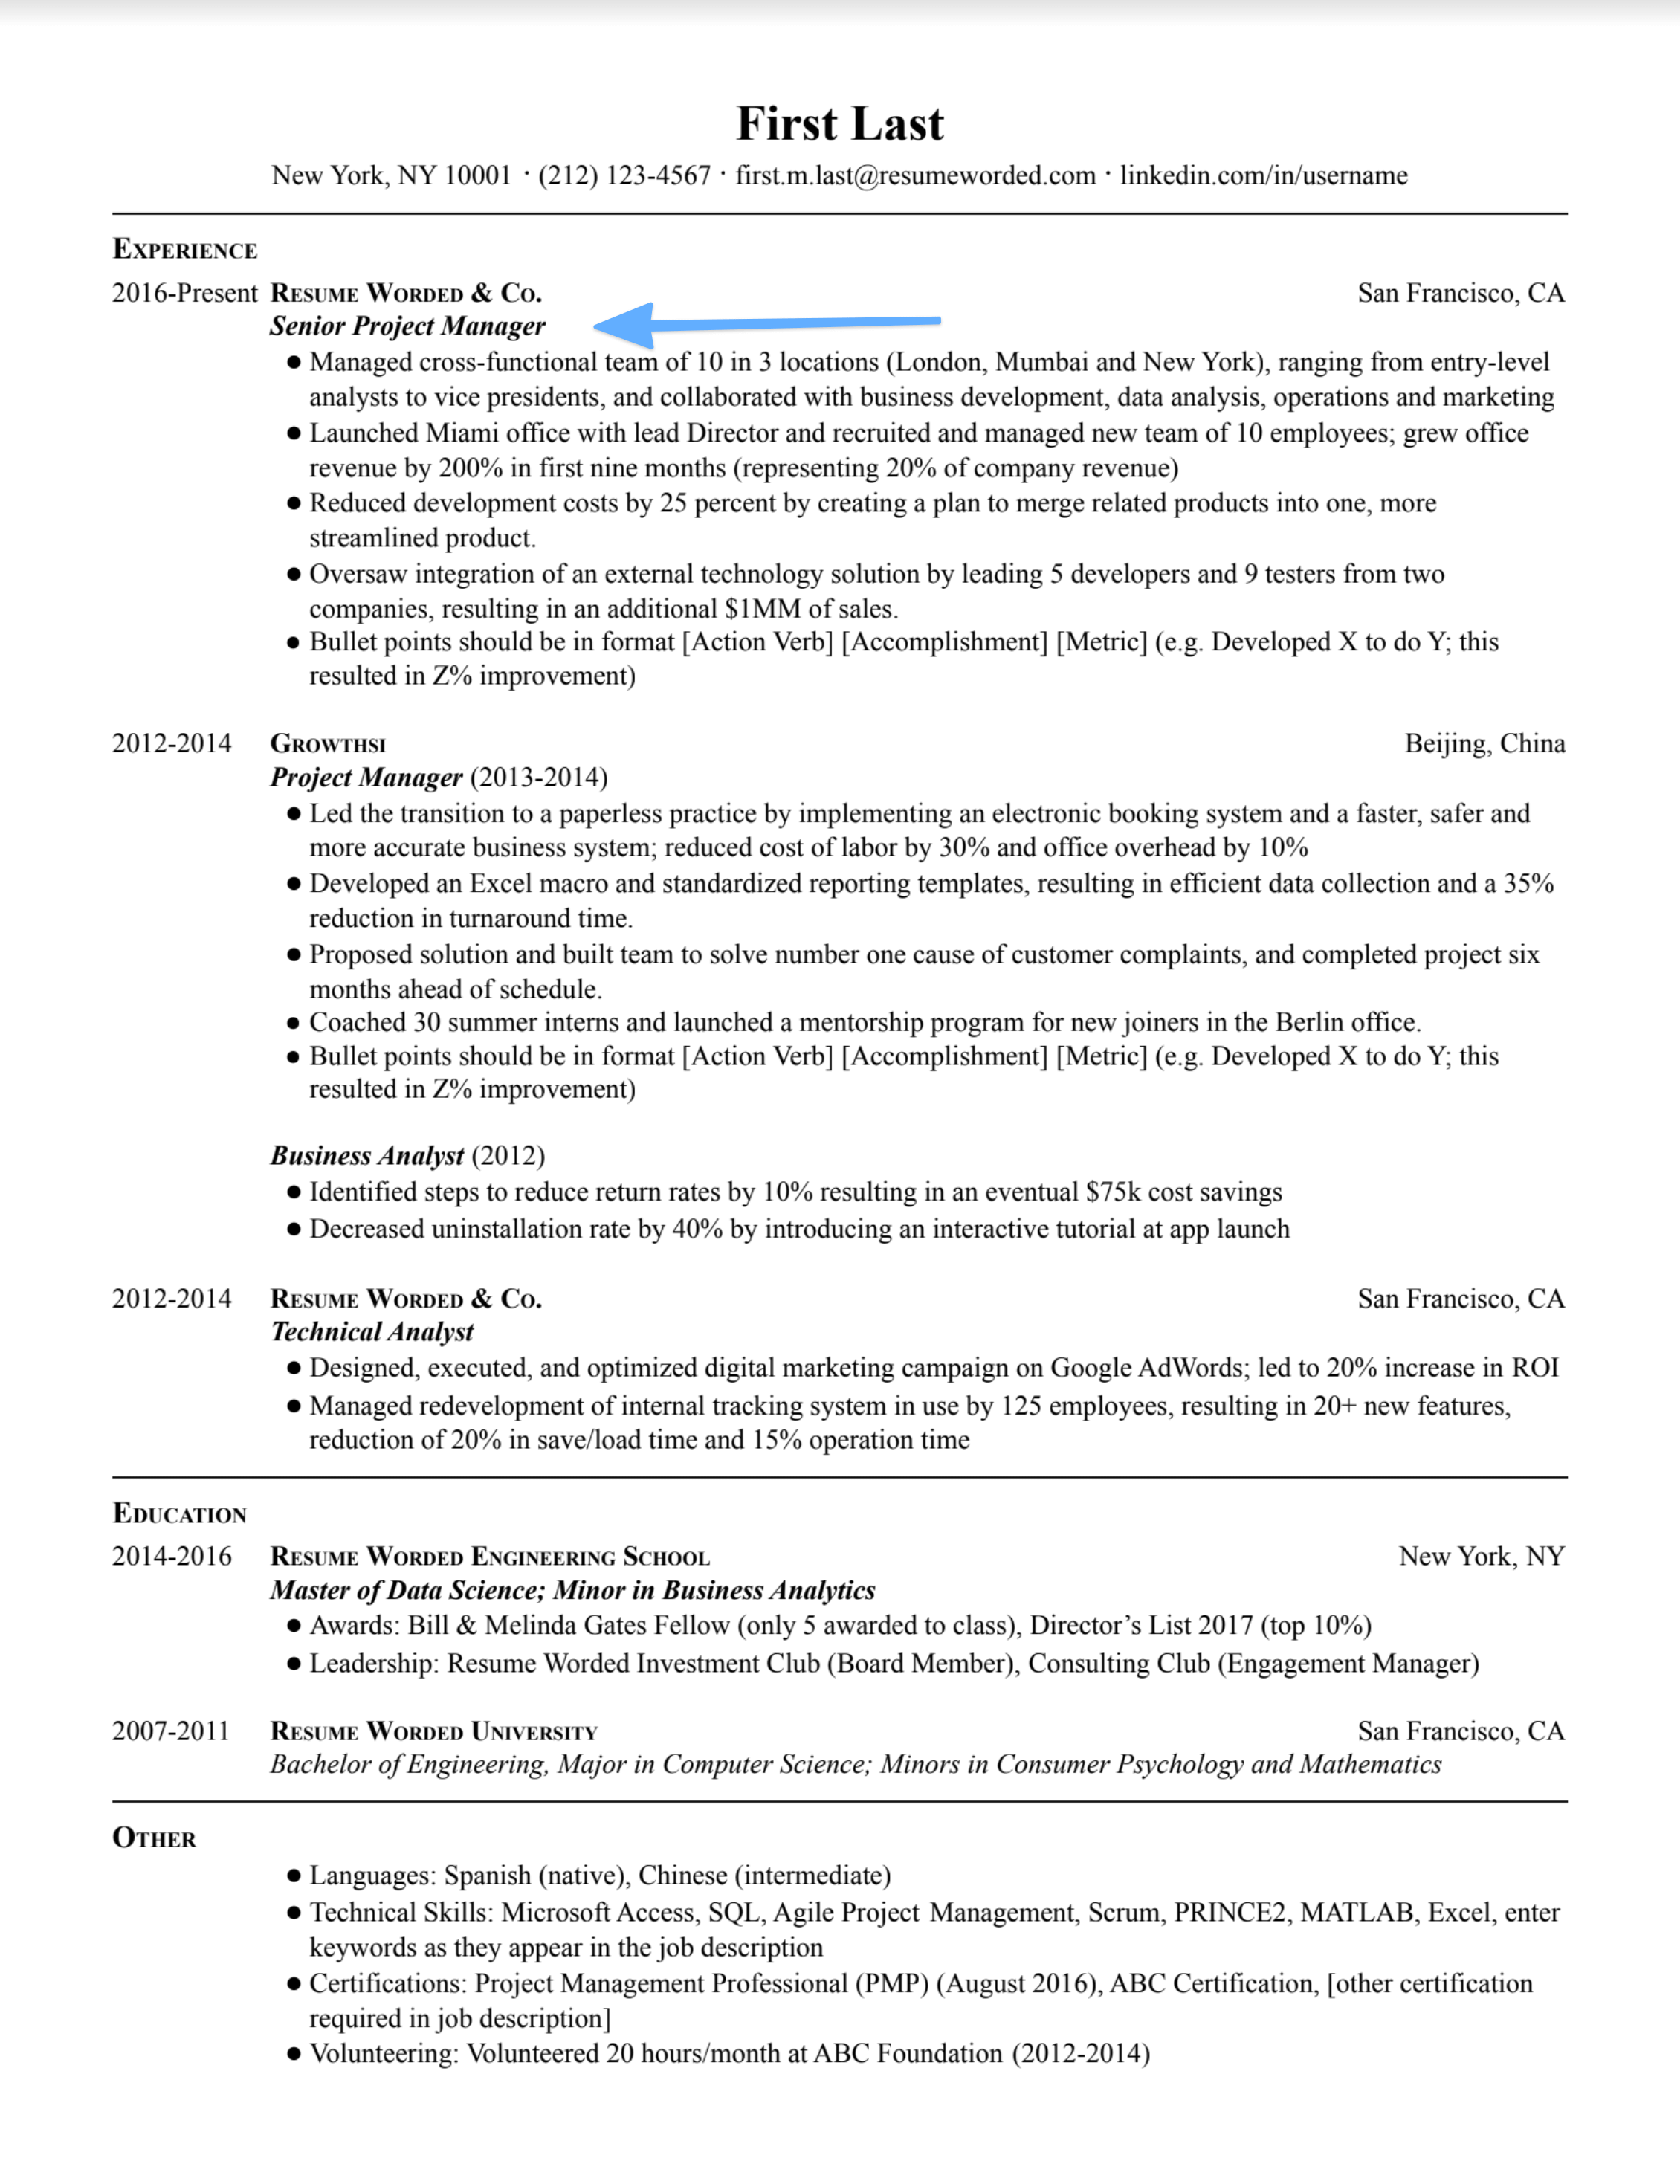 Senior Project Manager Resume Sample